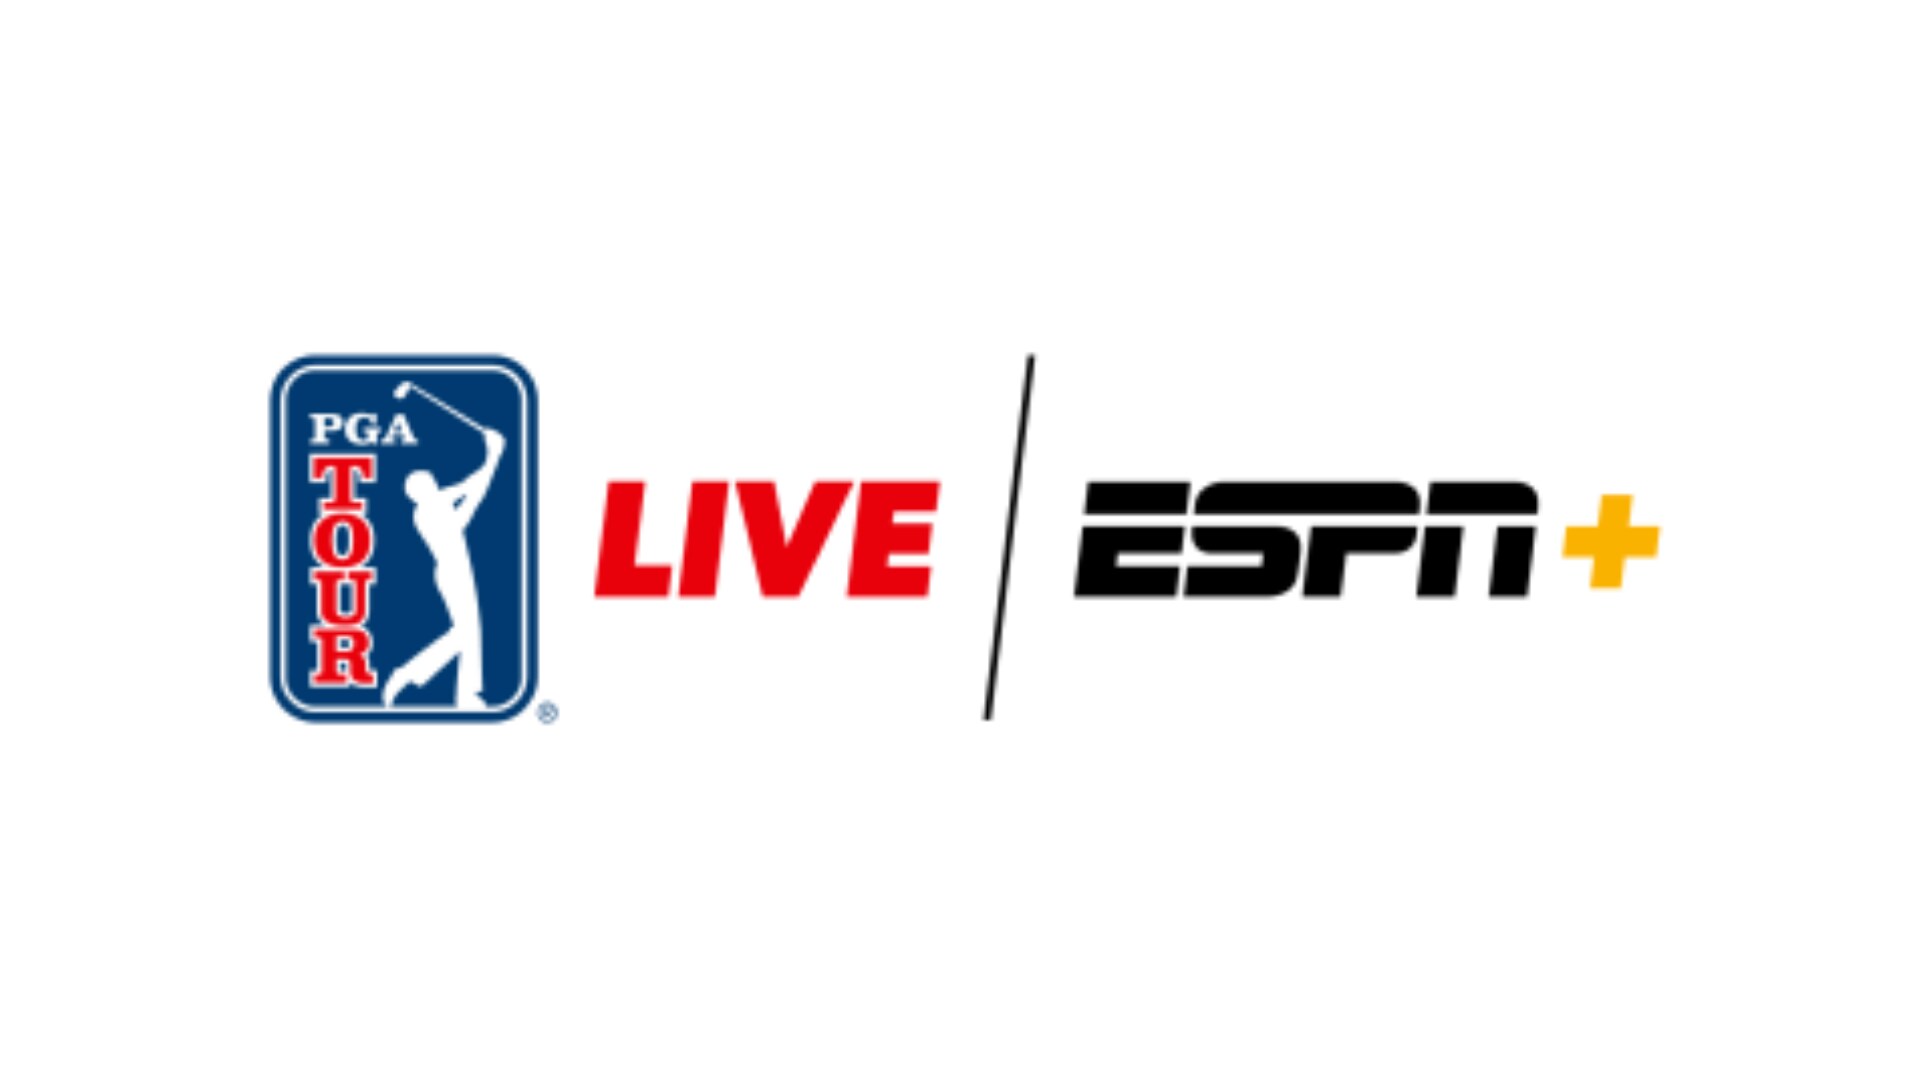 PGA TOUR, ESPN+ Announce Details of Expanded and Extended Coverage Beginning in January